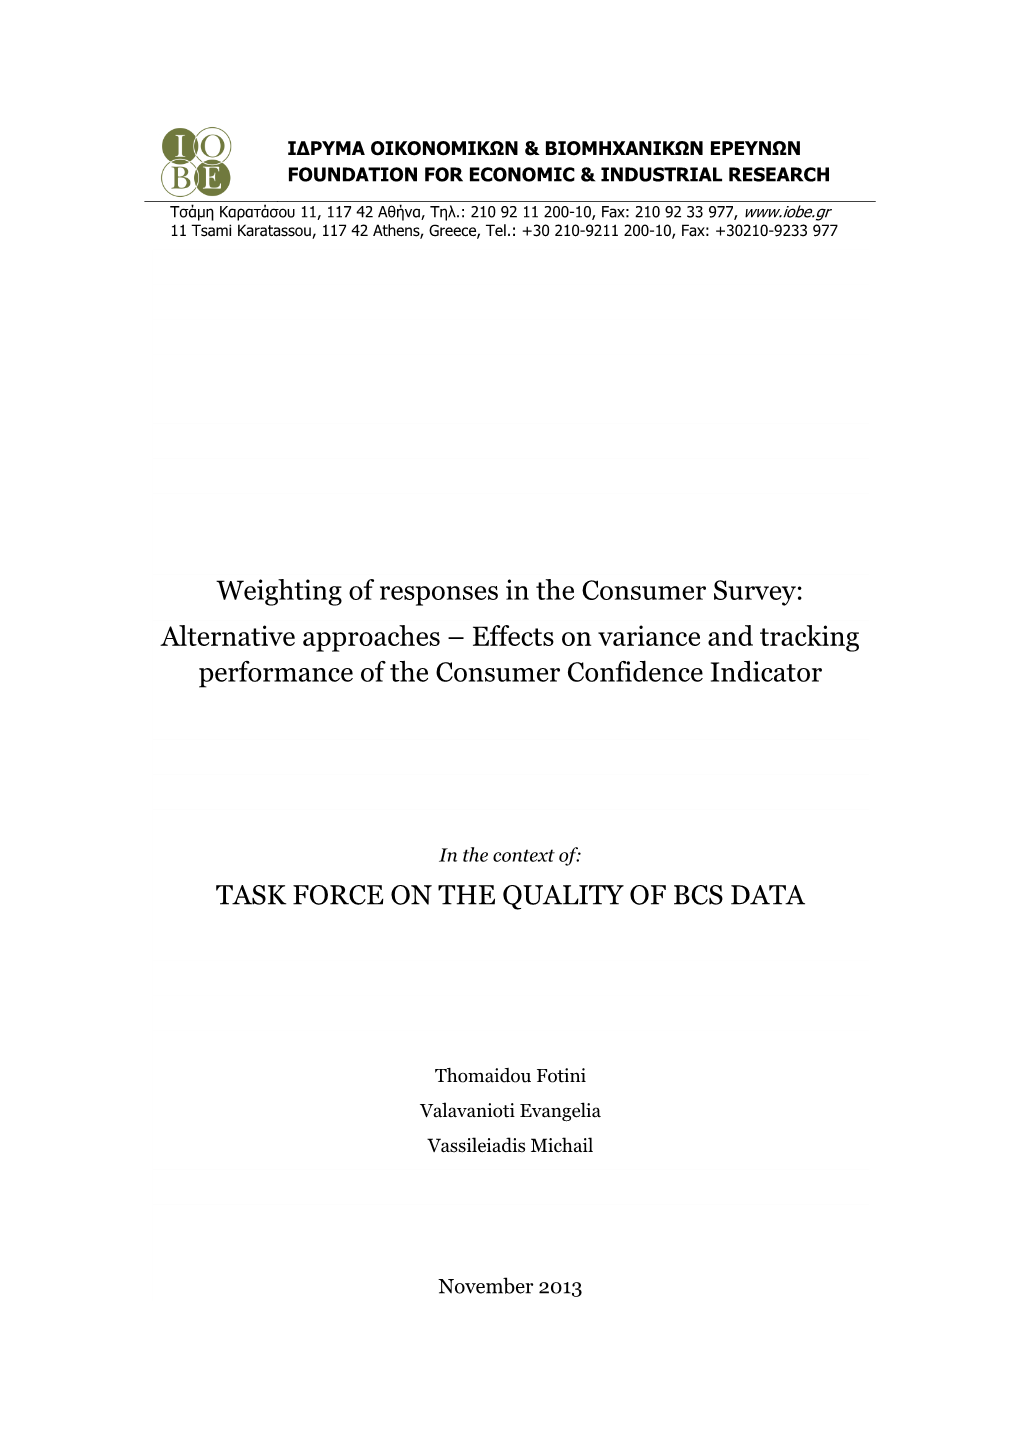 A Concise Review on Statistical Survey Weighting